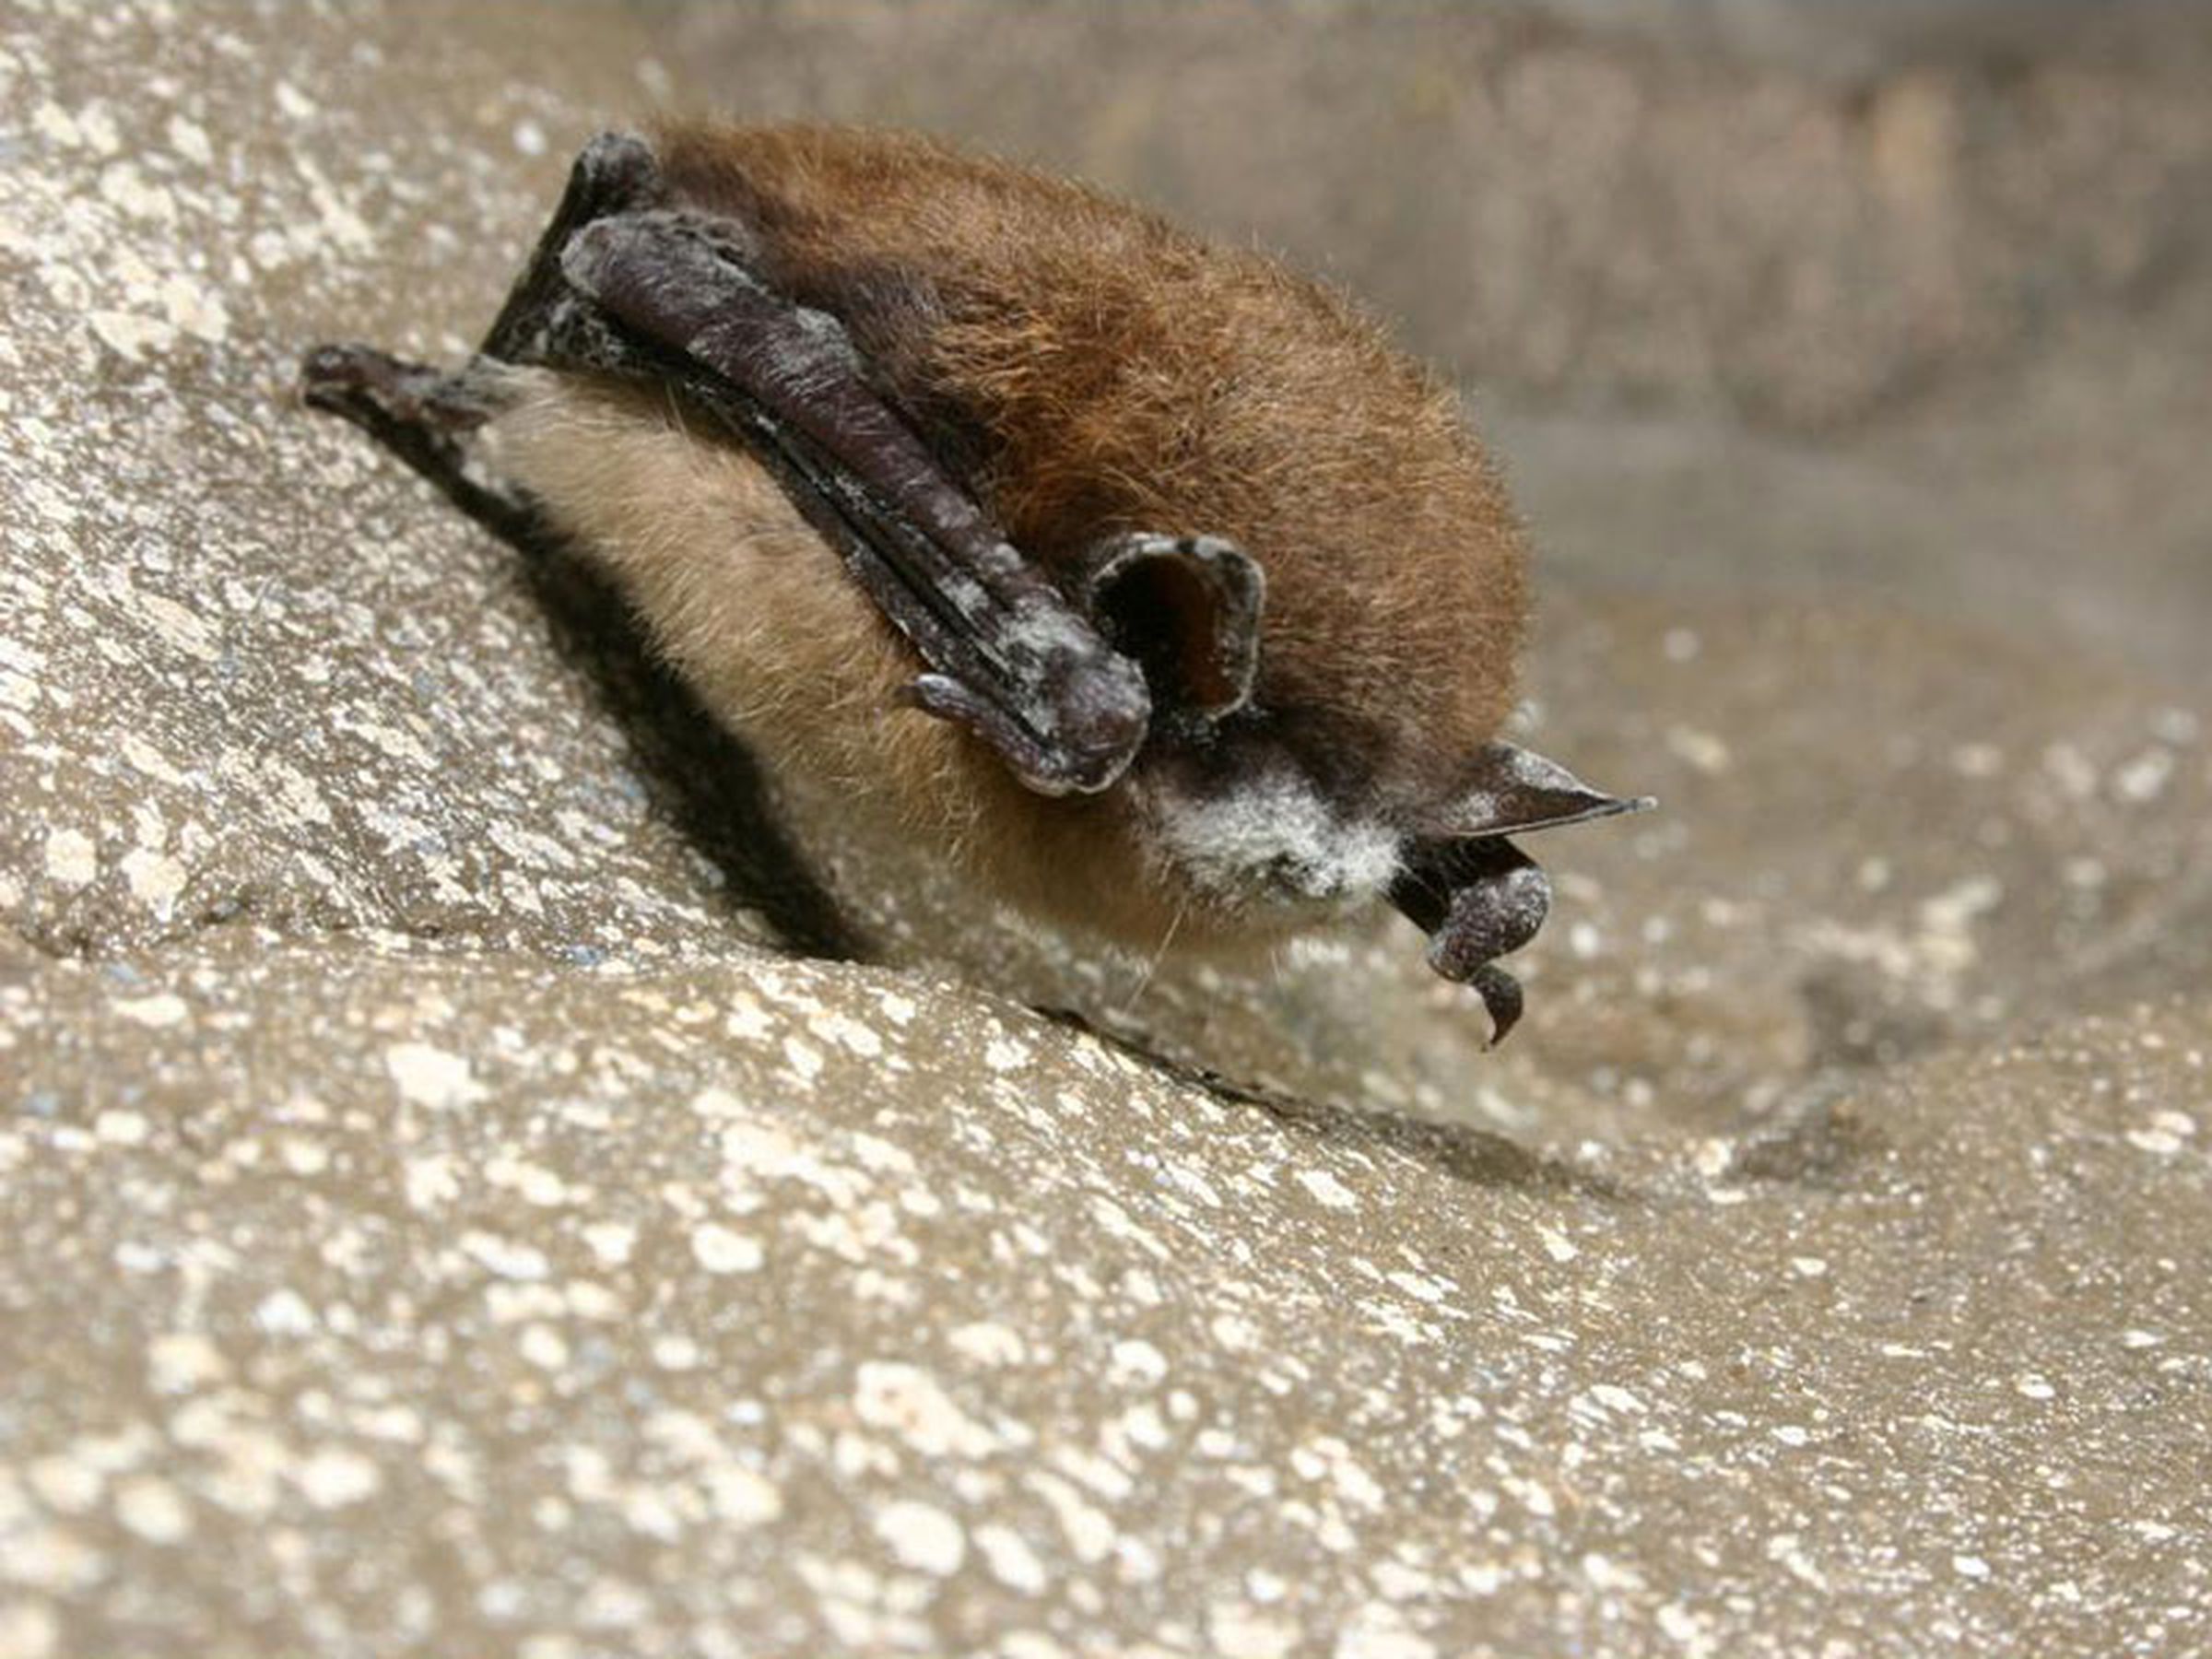 A little brown bat found in a New York cave exhibits fungal growth on its muzzle, ears, and wings.